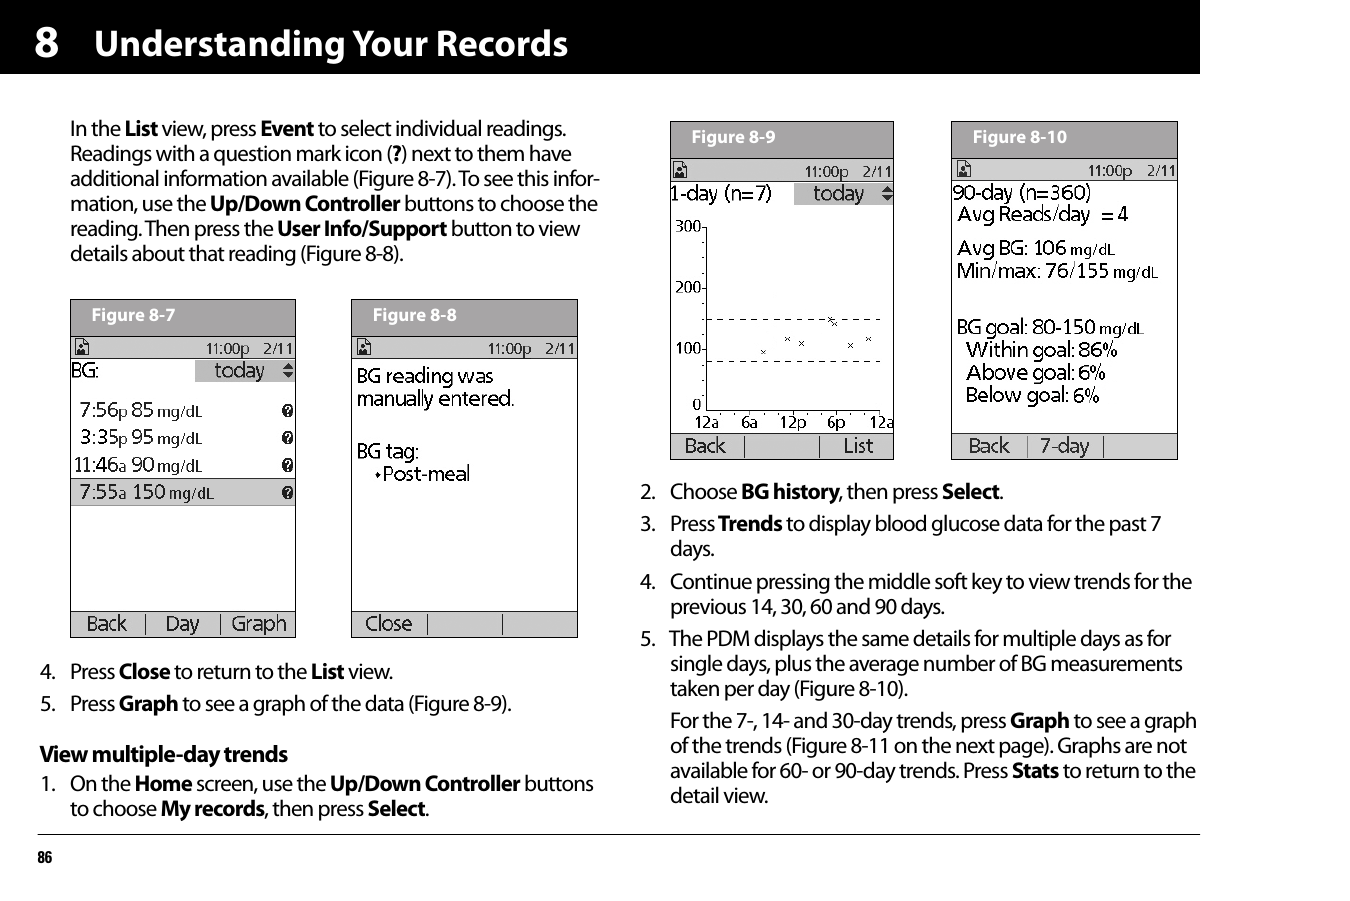 Understanding Your Records868In the List view, press Event to select individual readings. Readings with a question mark icon (?) next to them have additional information available (Figure 8-7). To see this infor-mation, use the Up/Down Controller buttons to choose the reading. Then press the User Info/Support button to view details about that reading (Figure 8-8).4. Press Close to return to the List view.5. Press Graph to see a graph of the data (Figure 8-9).View multiple-day trends1. On the Home screen, use the Up/Down Controller buttons to choose My records, then press Select.2. Choose BG history, then press Select.3. Press Trends to display blood glucose data for the past 7 days.4. Continue pressing the middle soft key to view trends for the previous 14, 30, 60 and 90 days.5. The PDM displays the same details for multiple days as for single days, plus the average number of BG measurements taken per day (Figure 8-10). For the 7-, 14- and 30-day trends, press Graph to see a graph of the trends (Figure 8-11 on the next page). Graphs are not available for 60- or 90-day trends. Press Stats to return to the detail view.Figure 8-7 Figure 8-8Figure 8-9 Figure 8-10